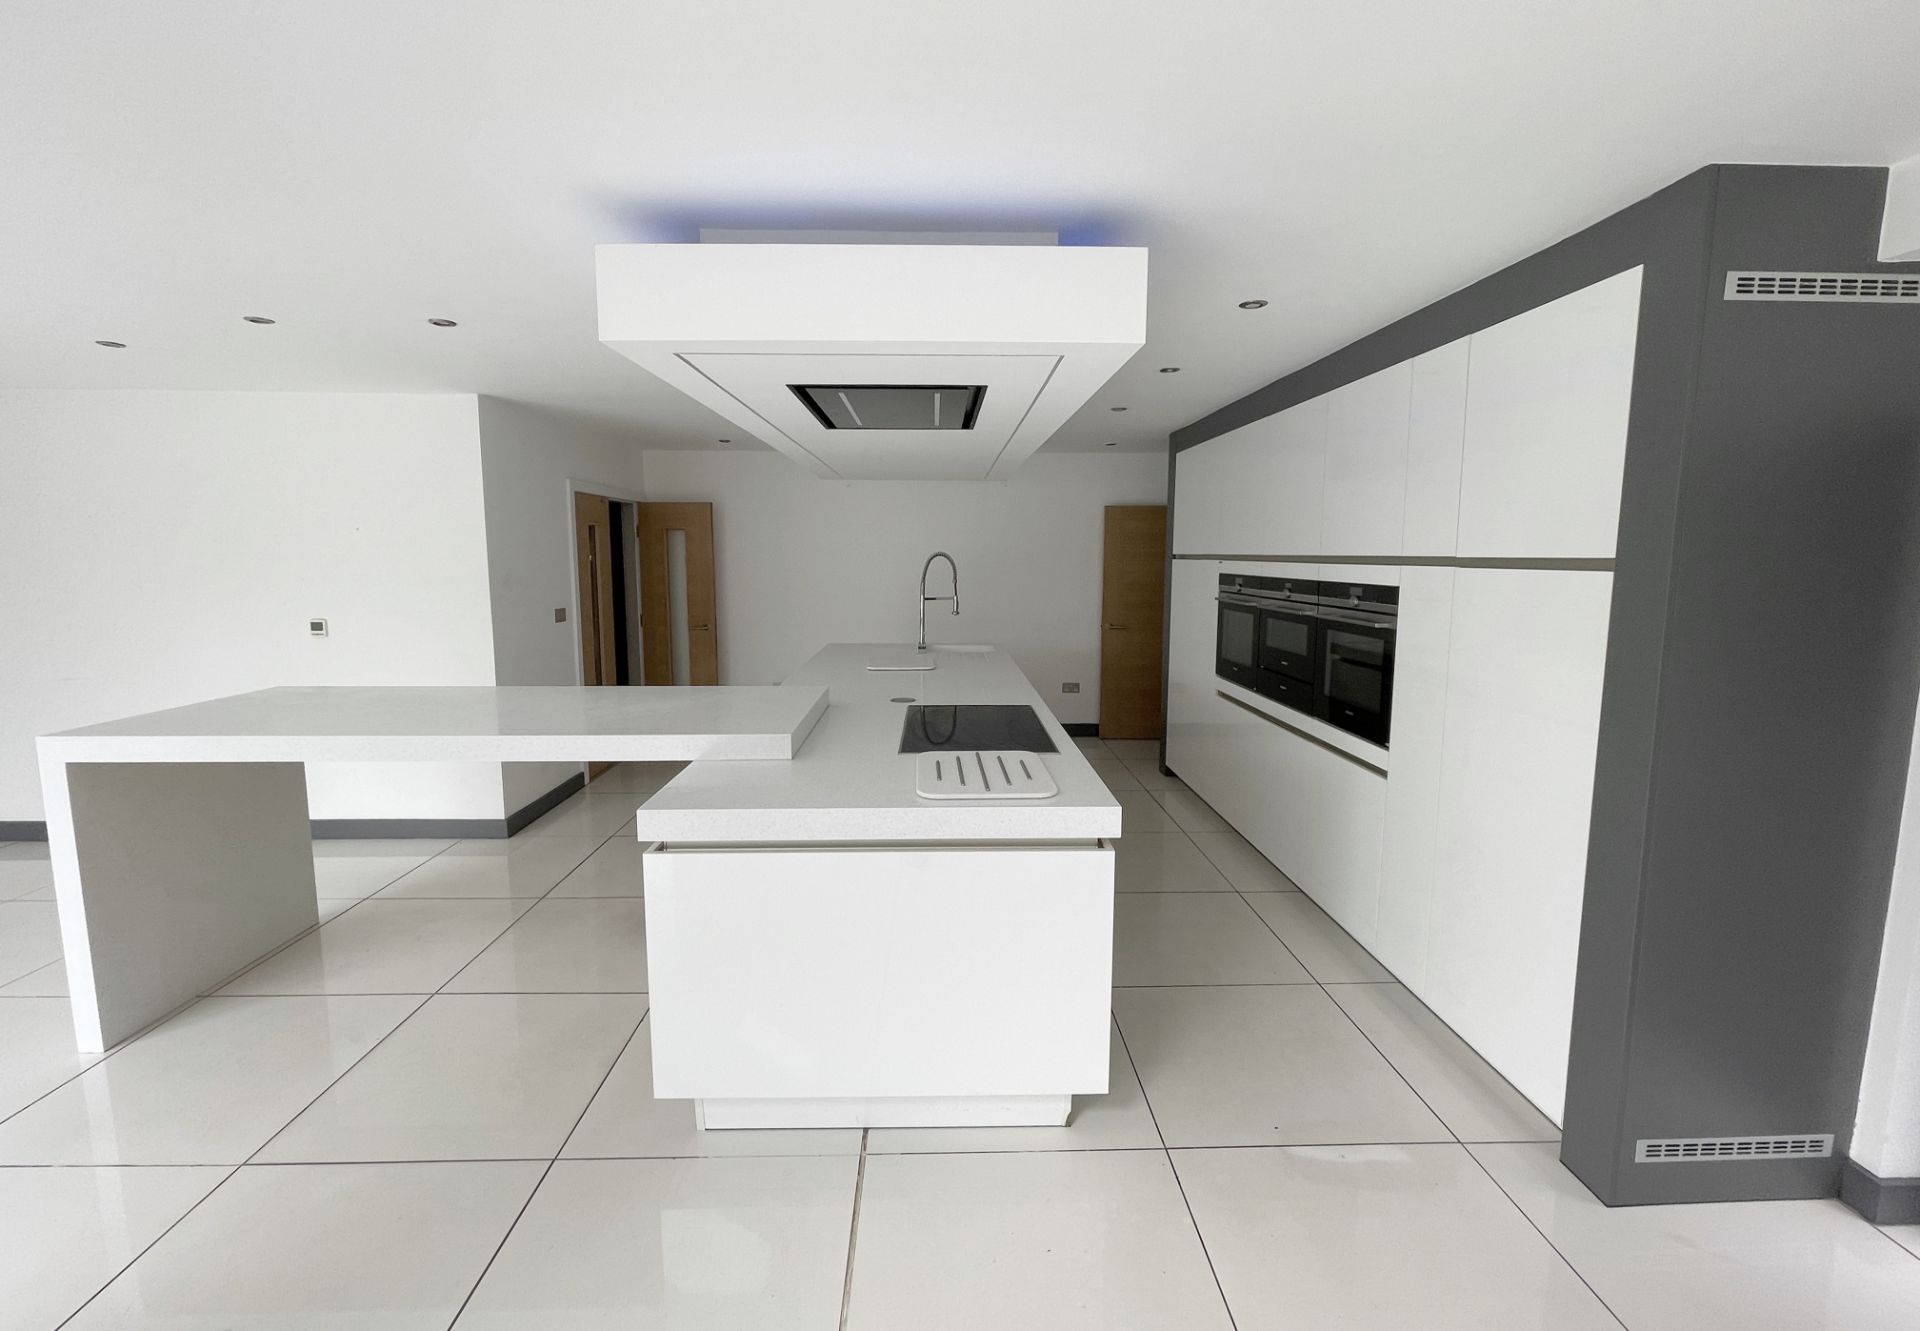 1 x SieMatic Contemporary Fitted Kitchen With Branded Appliances, Central Island + Corian Worktops - Image 2 of 100